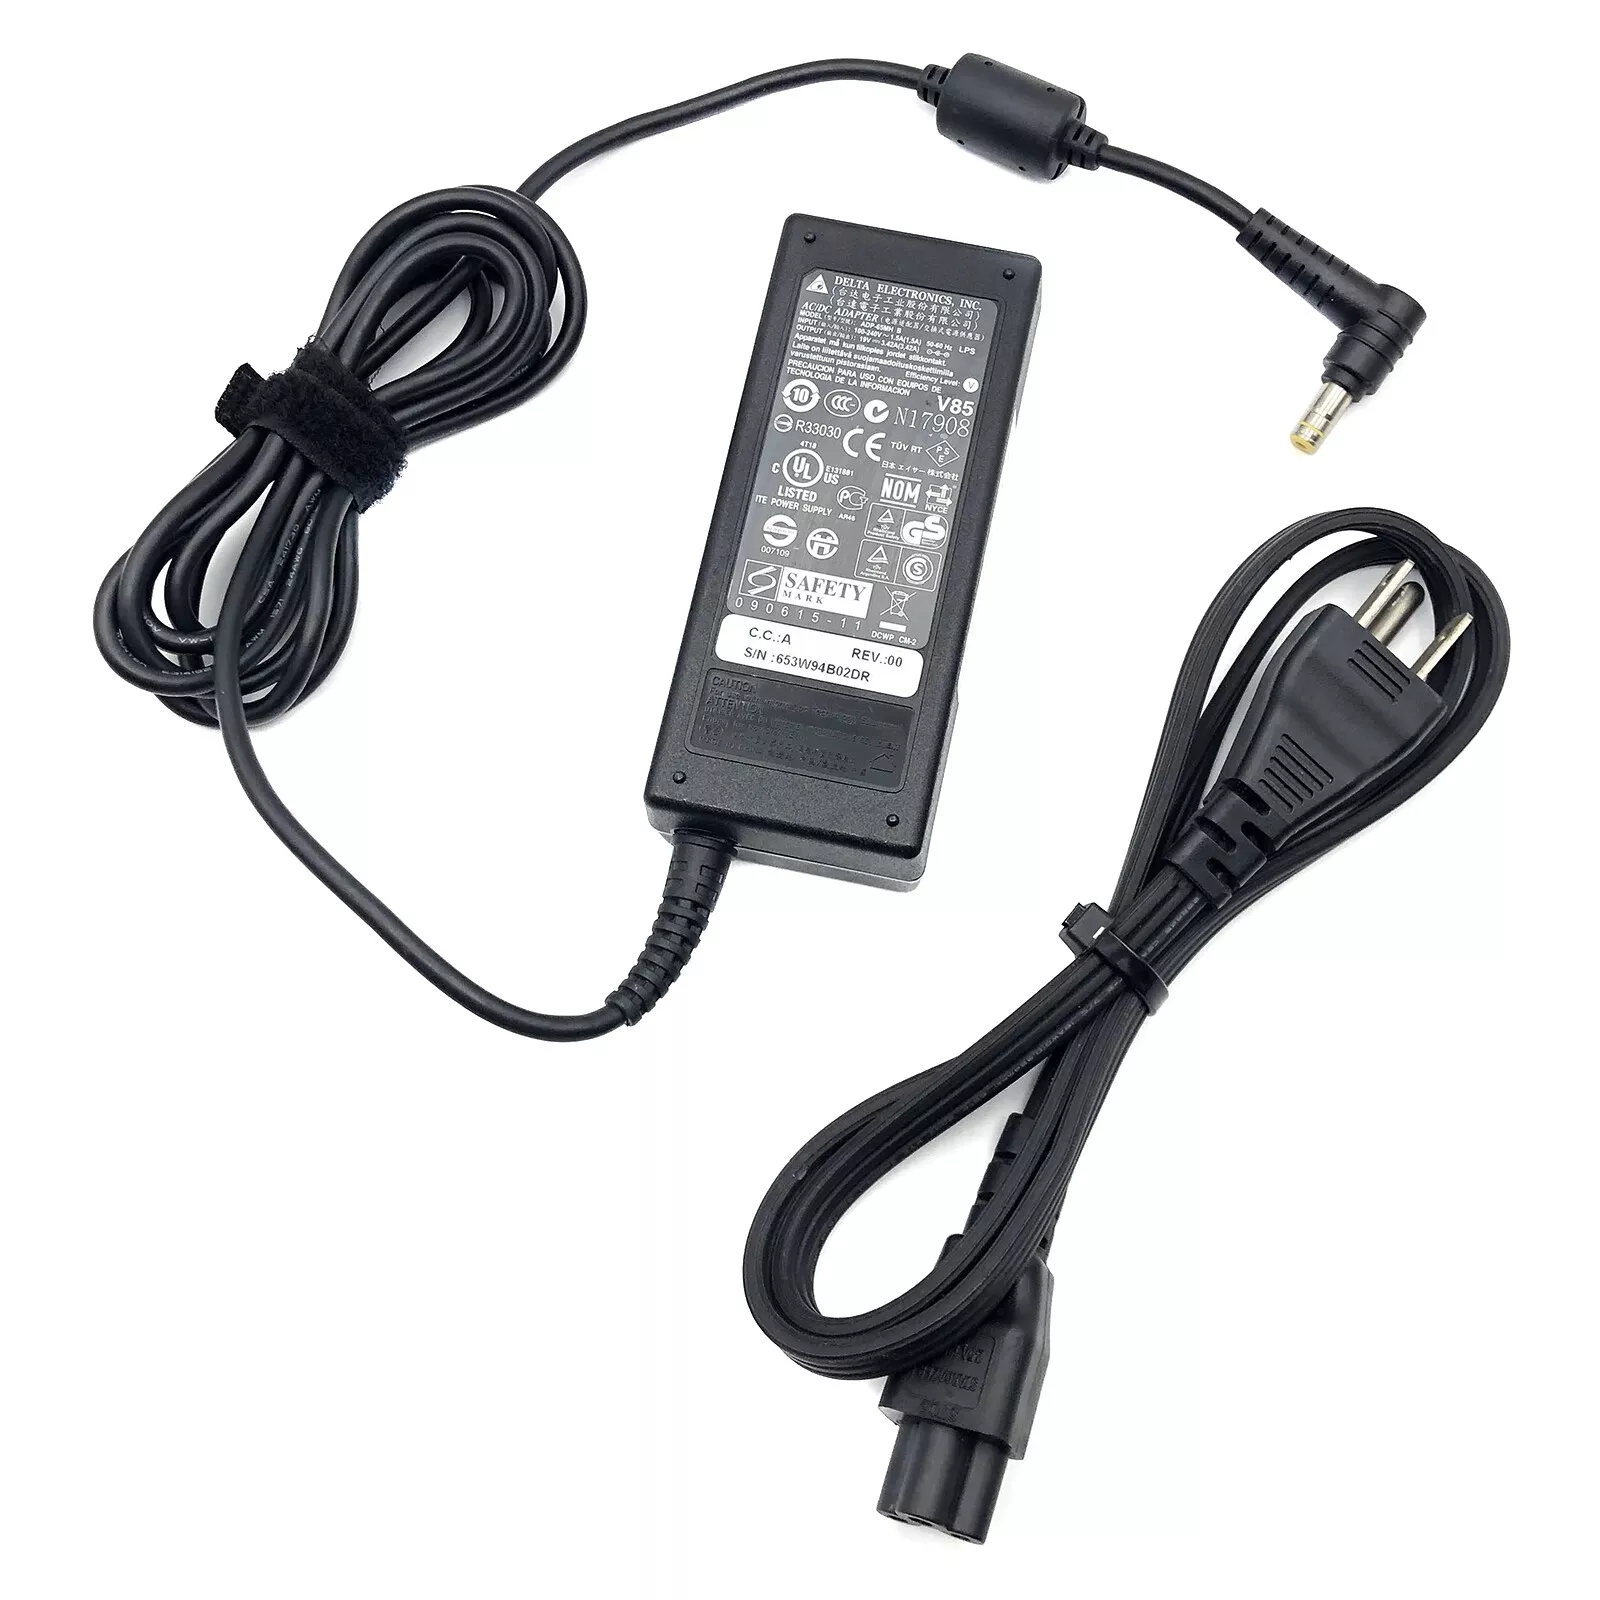 *Brand NEW*Genuine Delta 19V 3.42A 65W AC Adapter ADP-65MH B Power Supply